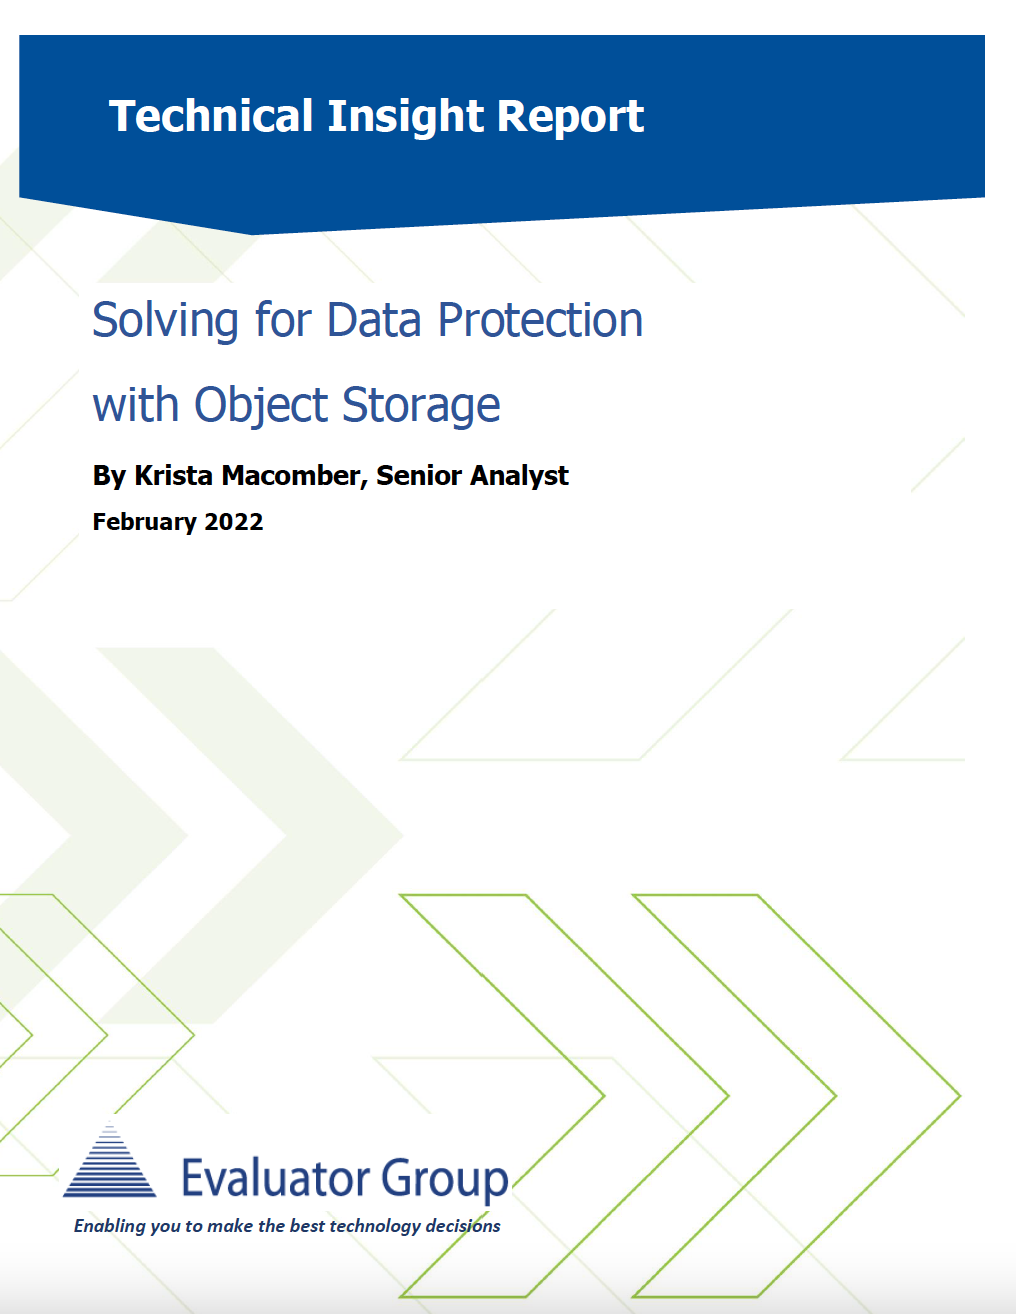 Solving For Data Protection With Object Storage Thumb